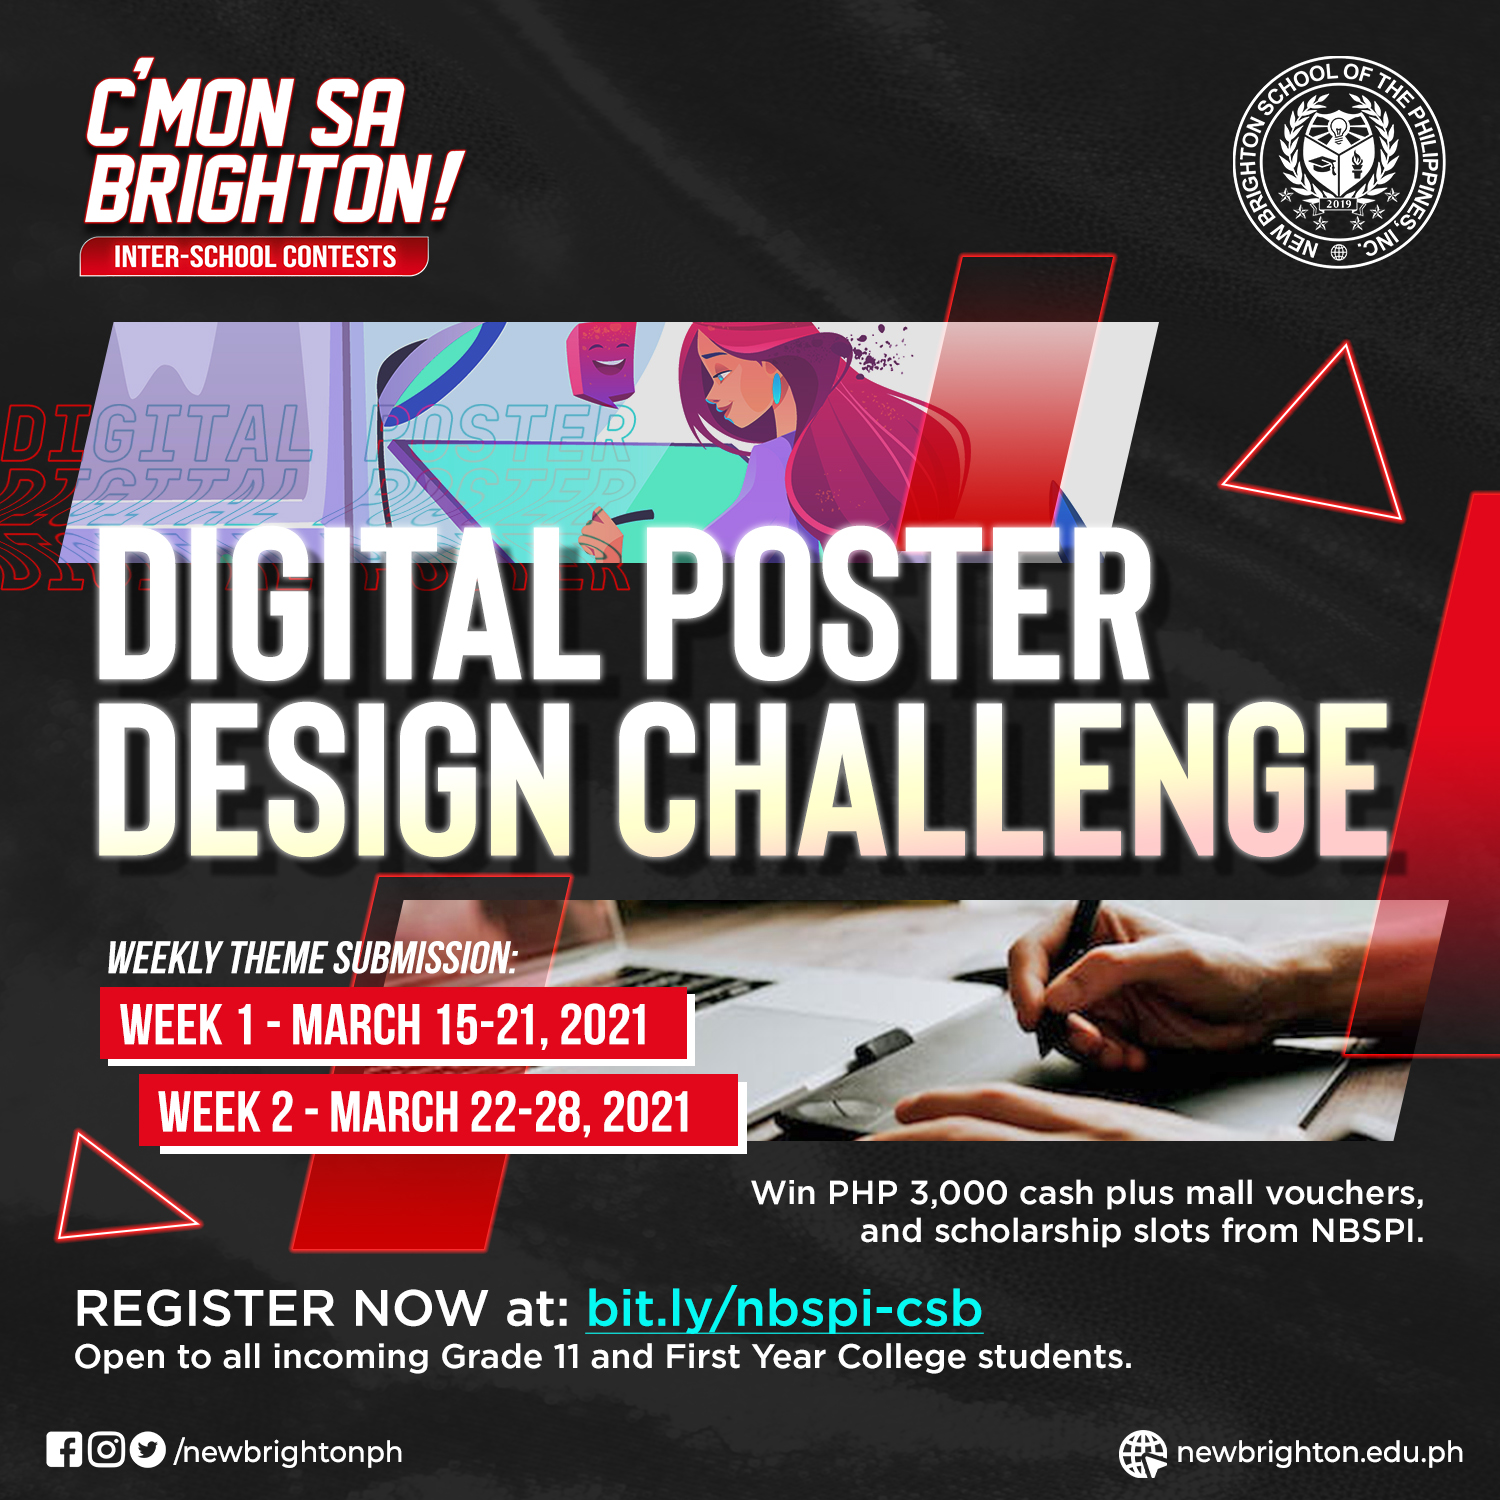 Calling all visual artists out there!